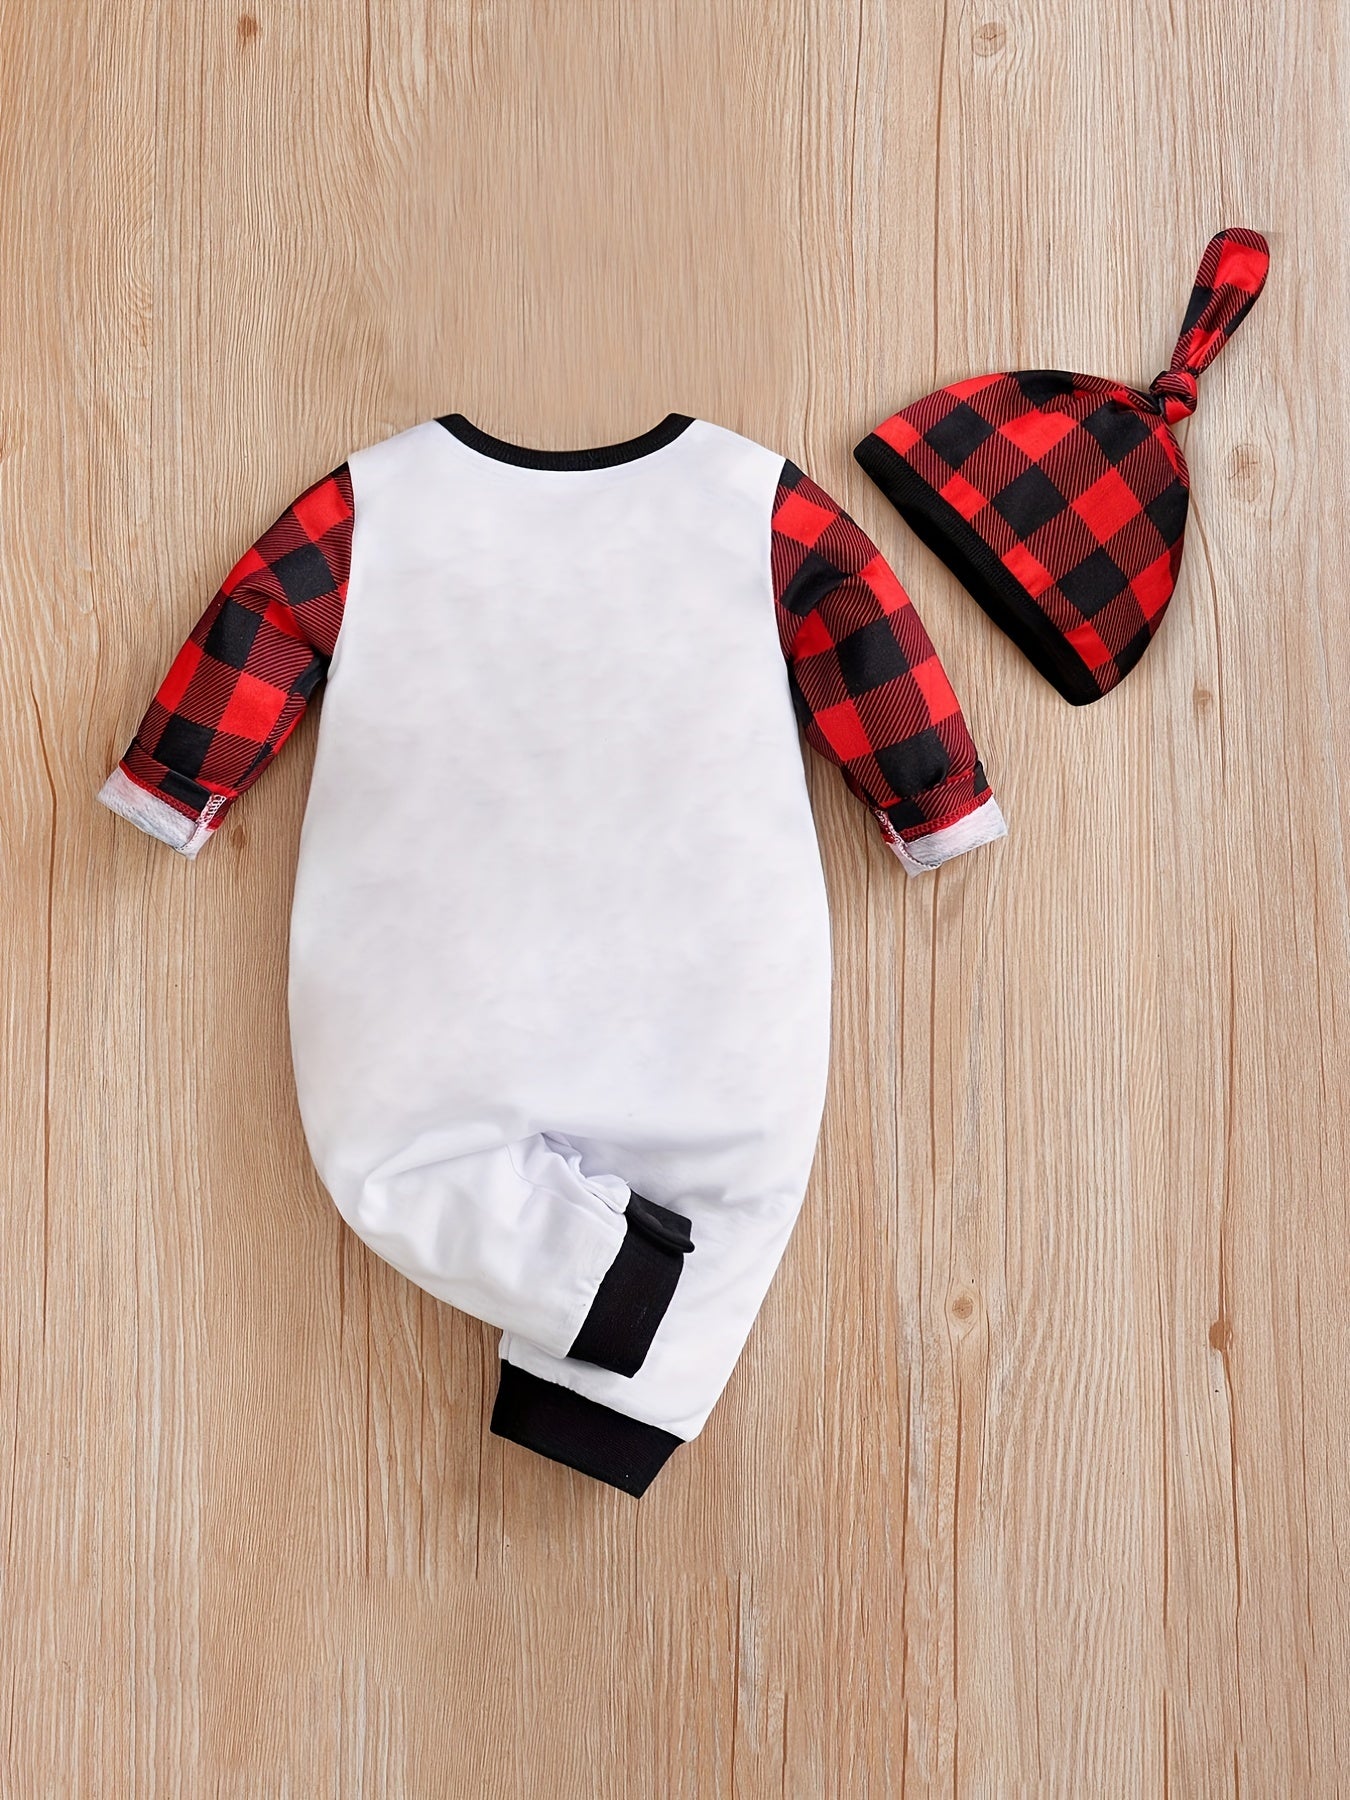 Christmas Letter Plaid Graphic Fake Overalls Romper, Cute Baby Bodysuit (Hat Included)